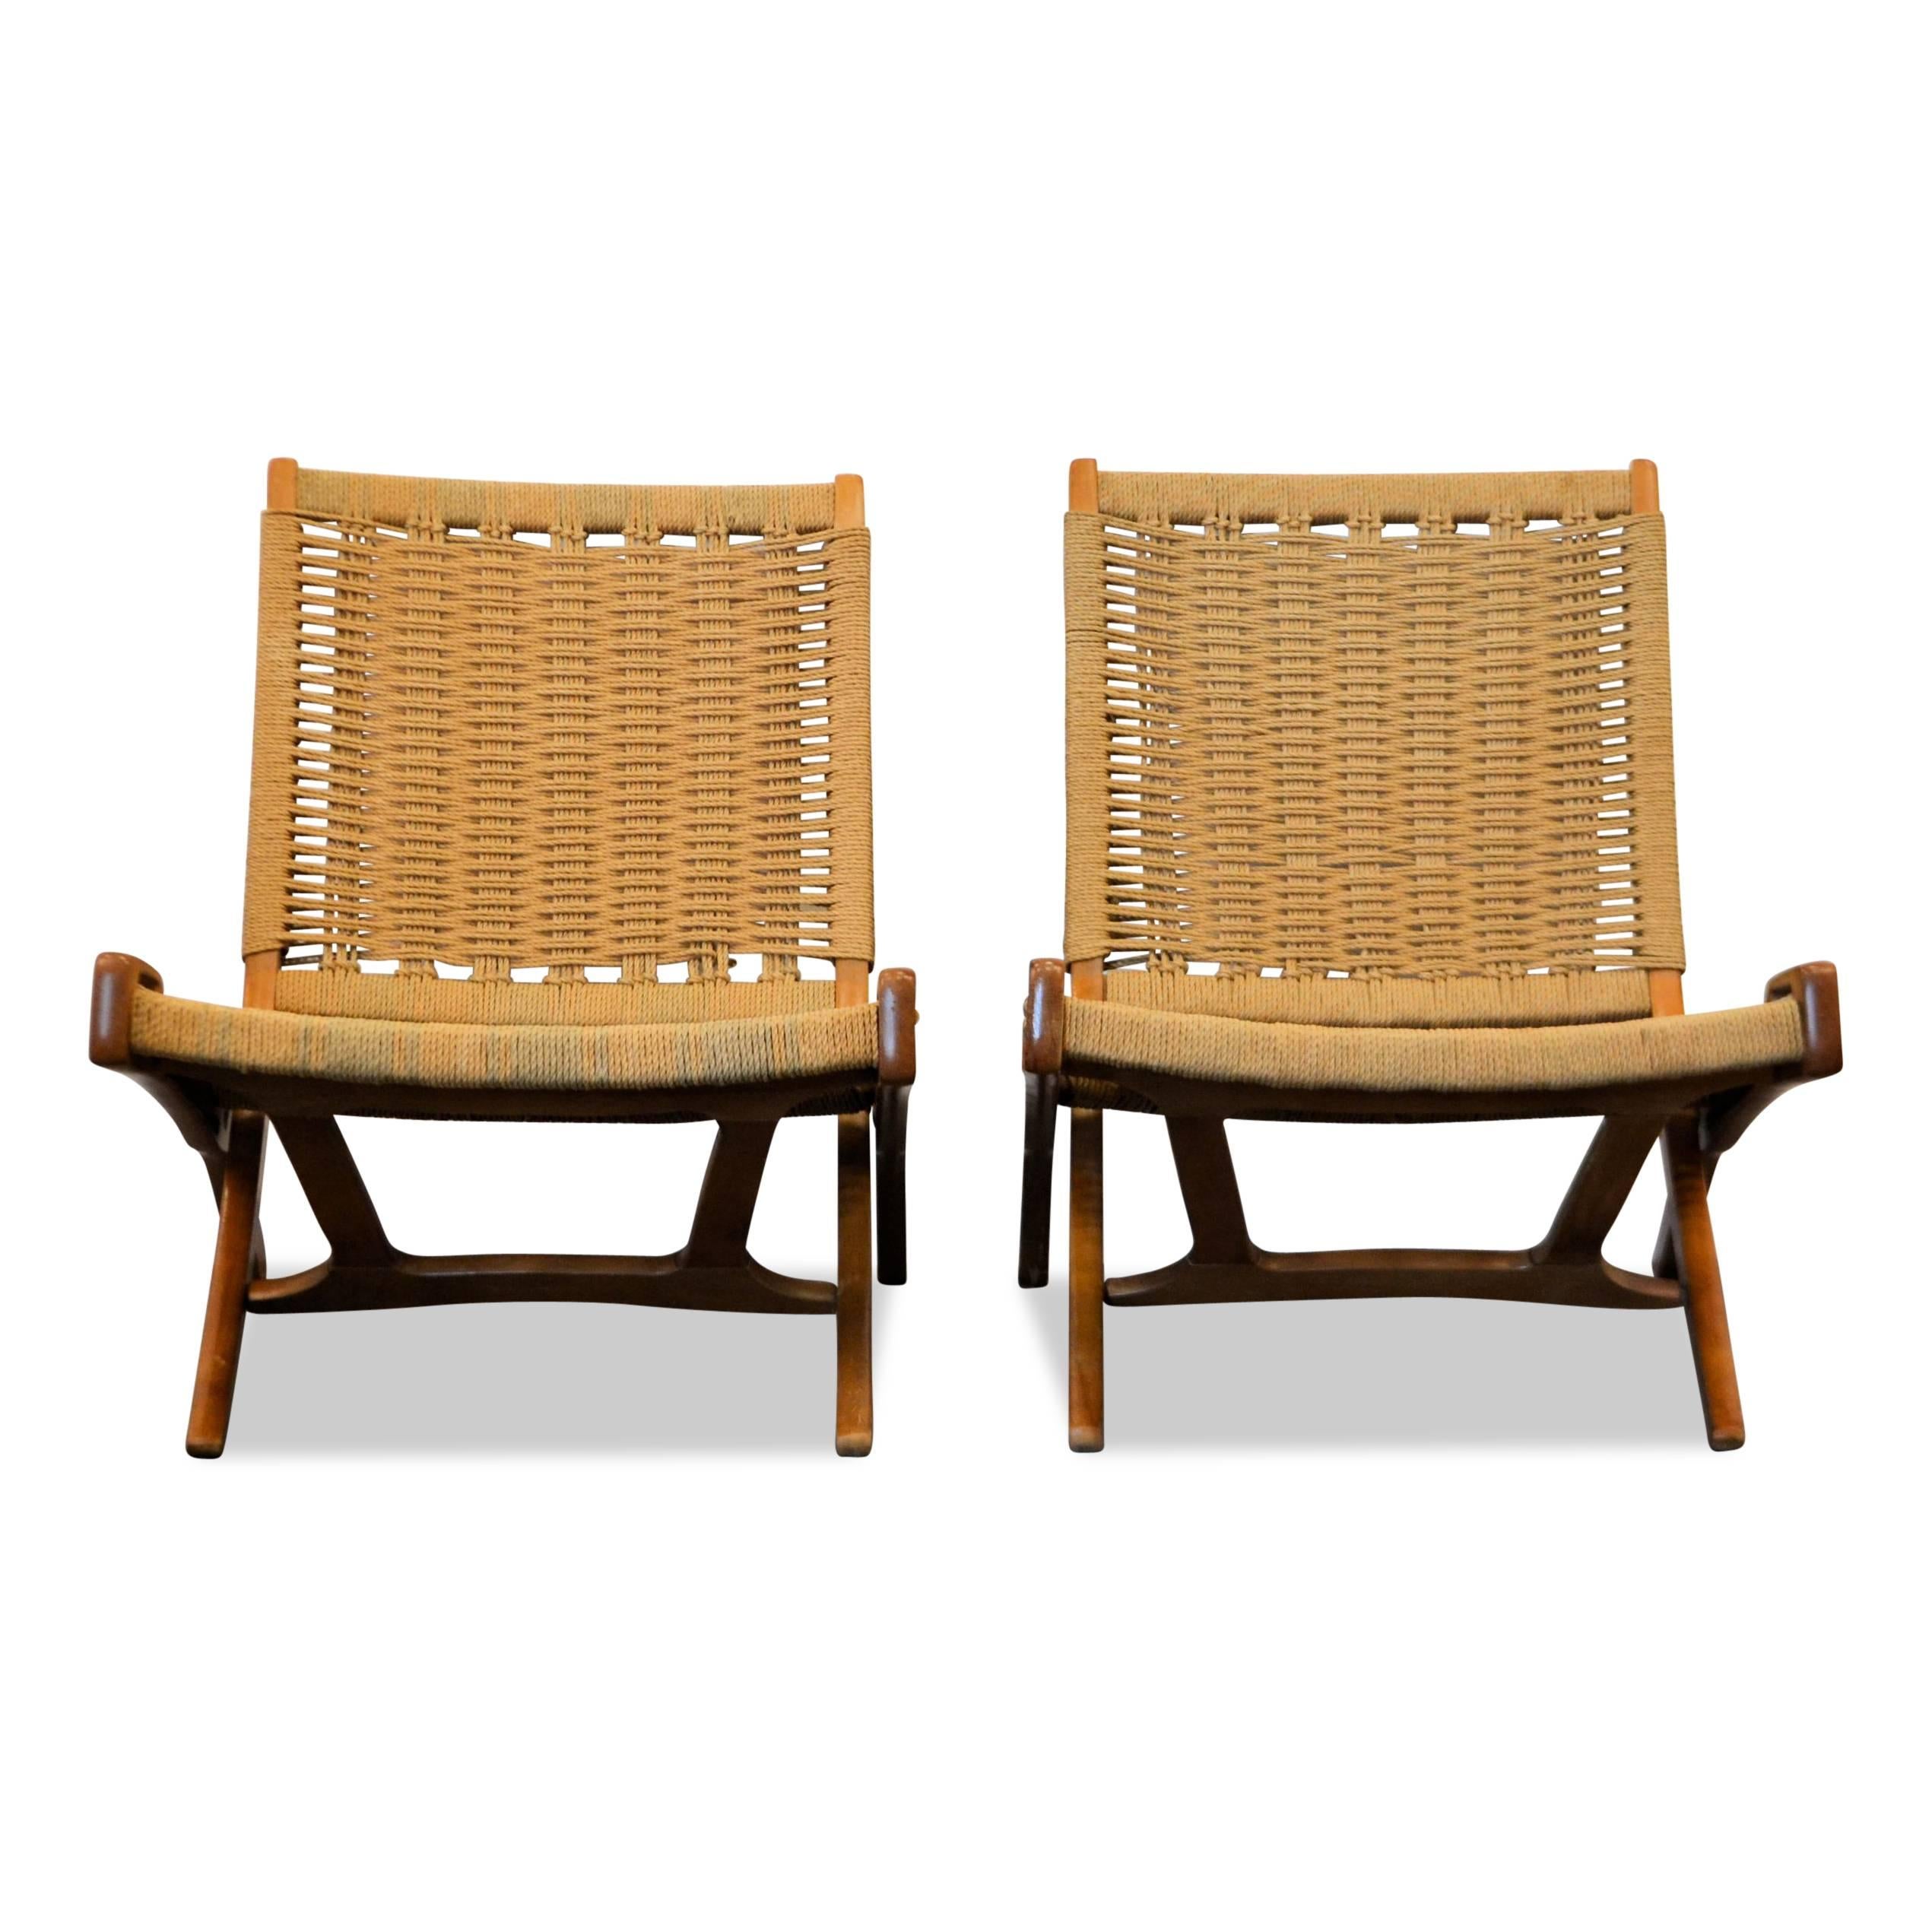 Mid-Century Modern Wegner style folding lounge chairs designed by English designer Ebert Wels. These super stylish low profile chairs are made of beautiful teak wood and woven cord. The design is very similar to the Hans J. Wegner model PP-512